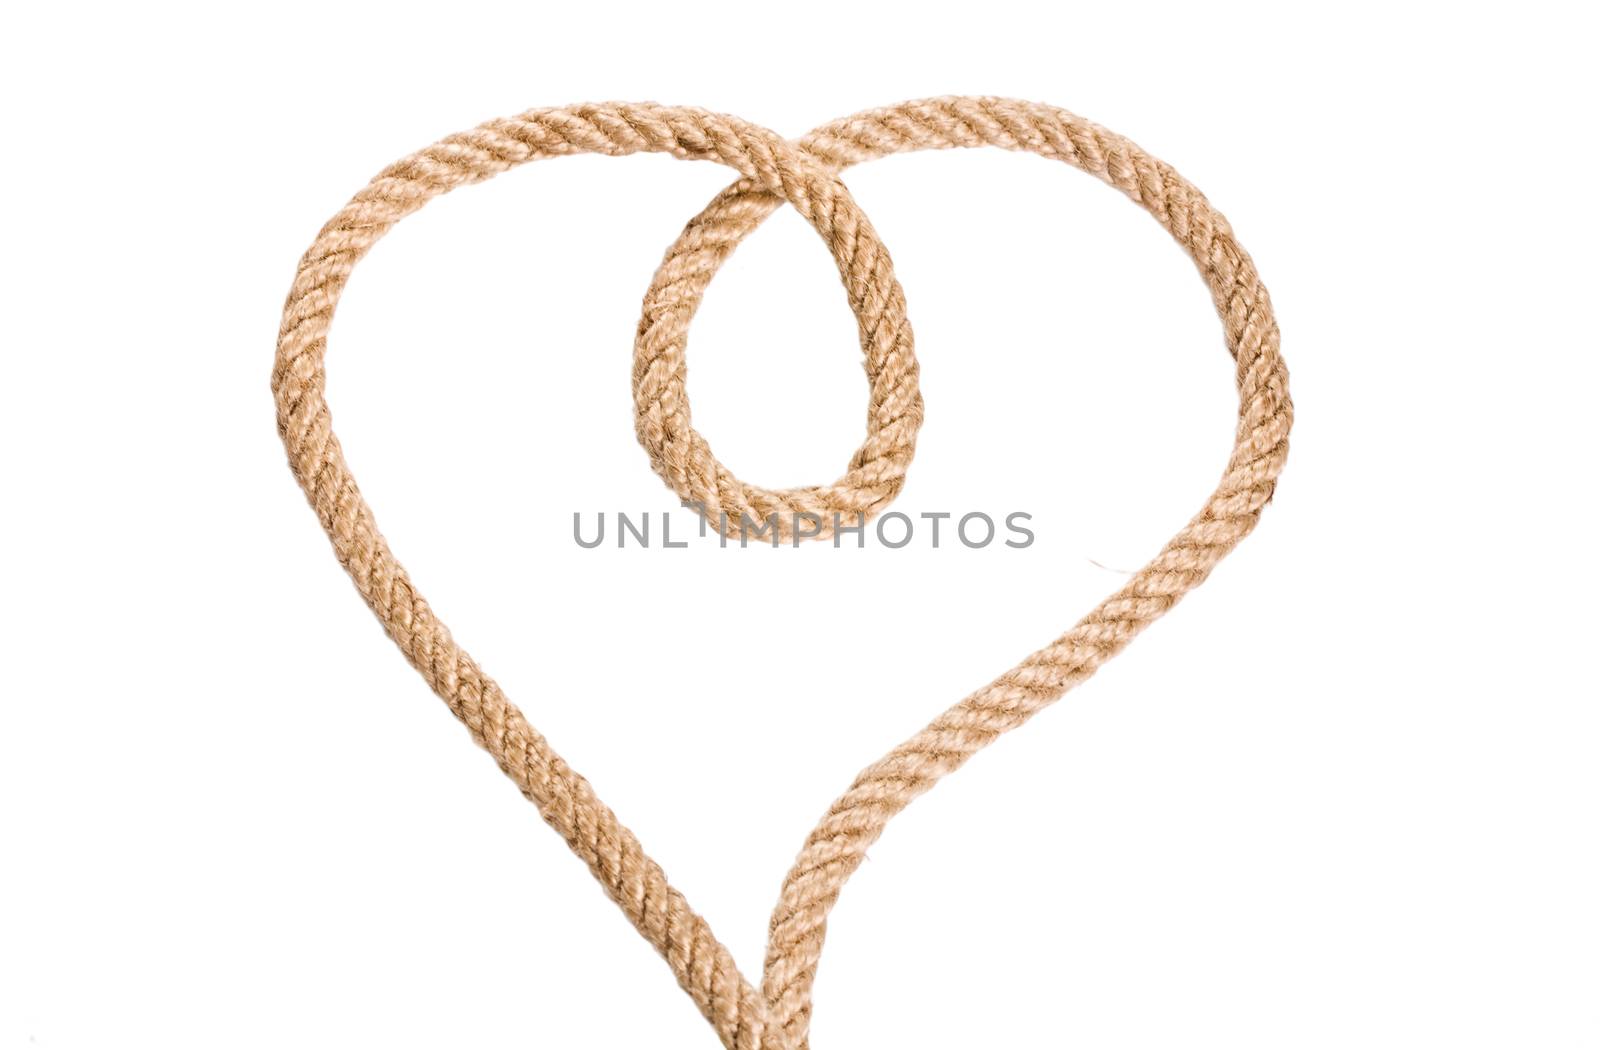 Rope heart shaped symbol, isolated on a white background.